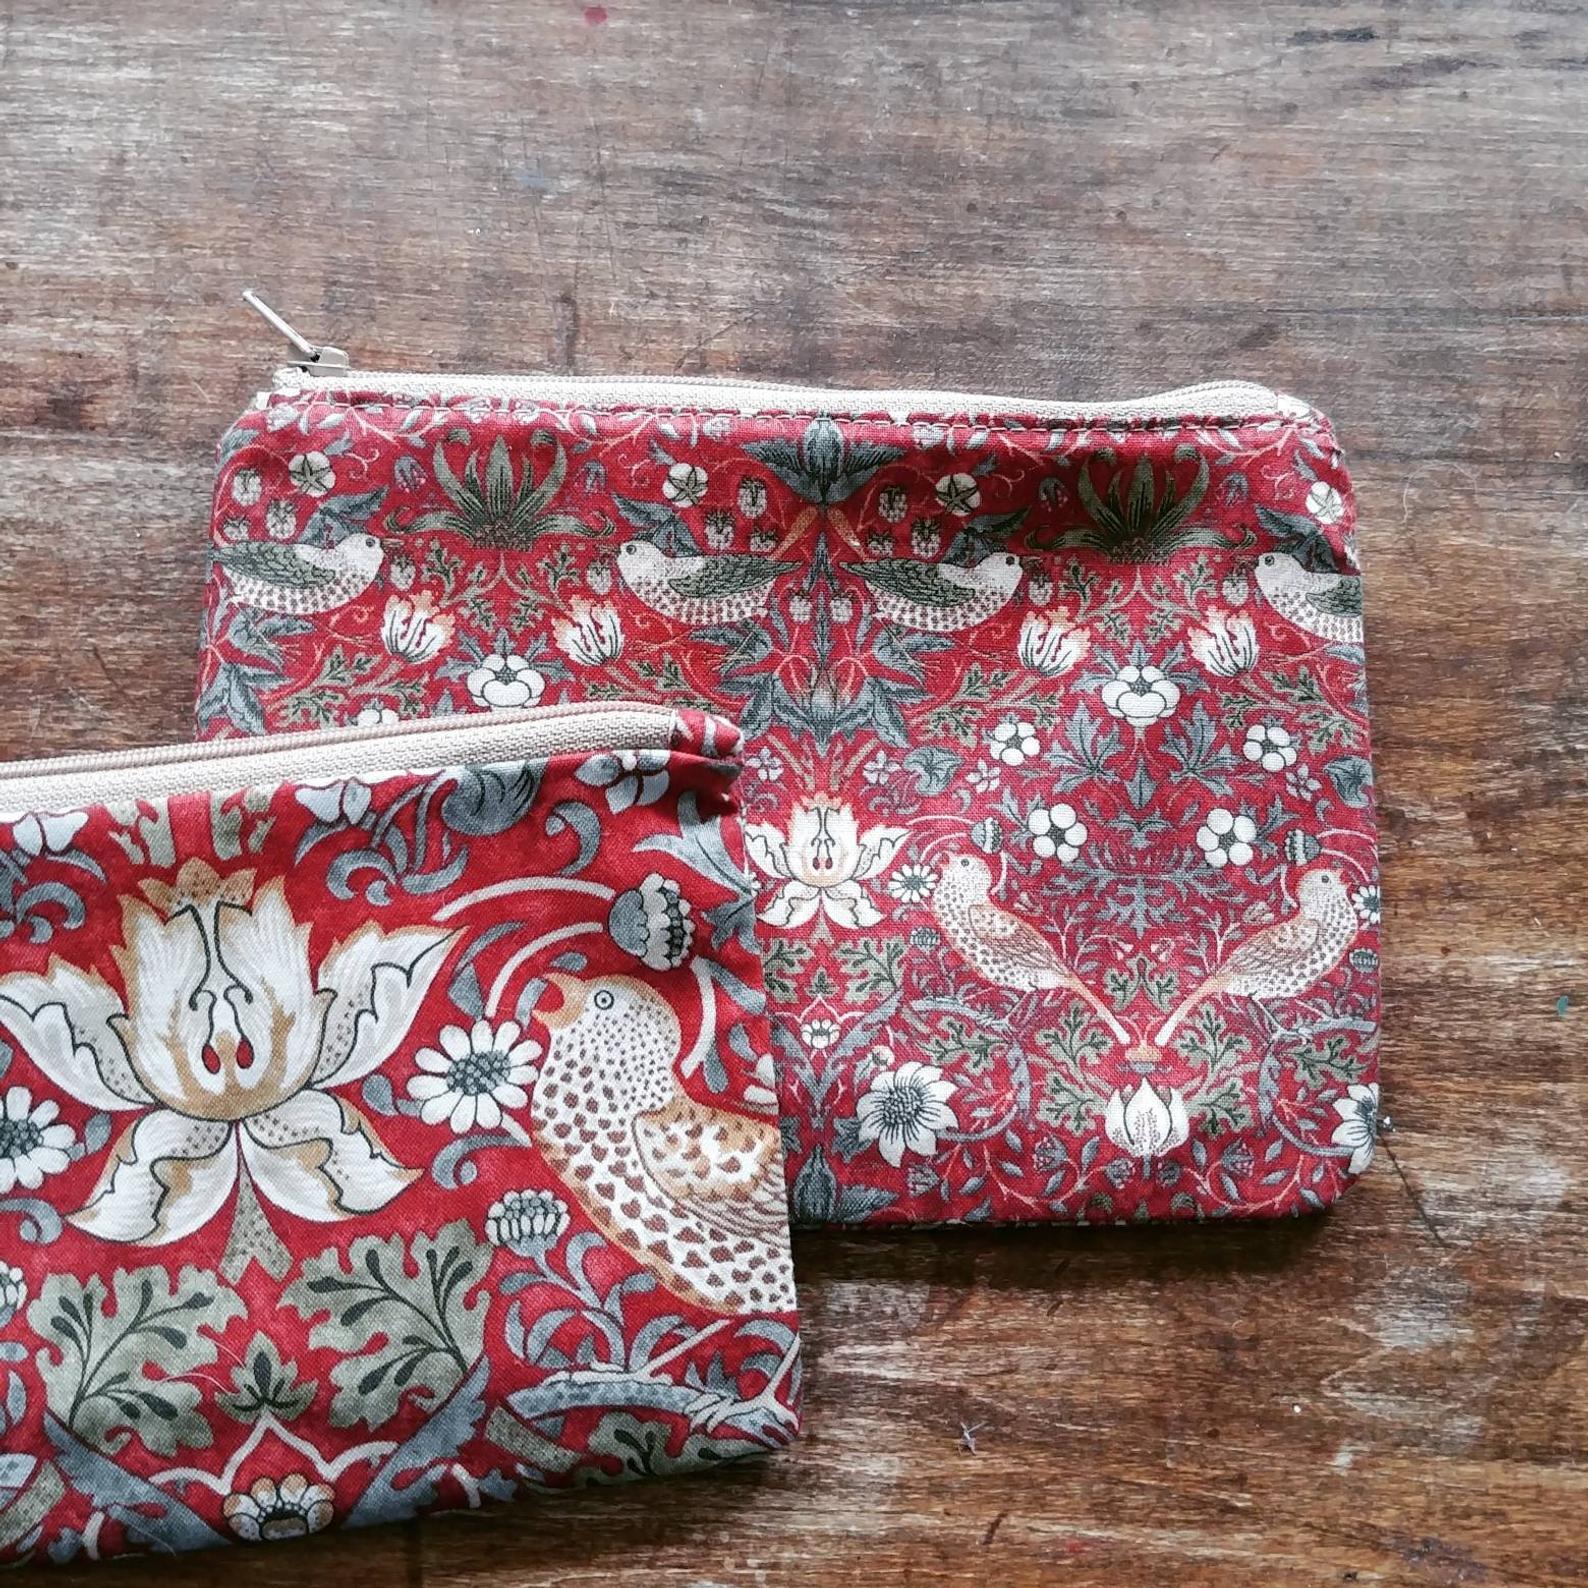 Passport Pouch in Strawberry Thief by William Morris print. From Plumage Studio Accessories